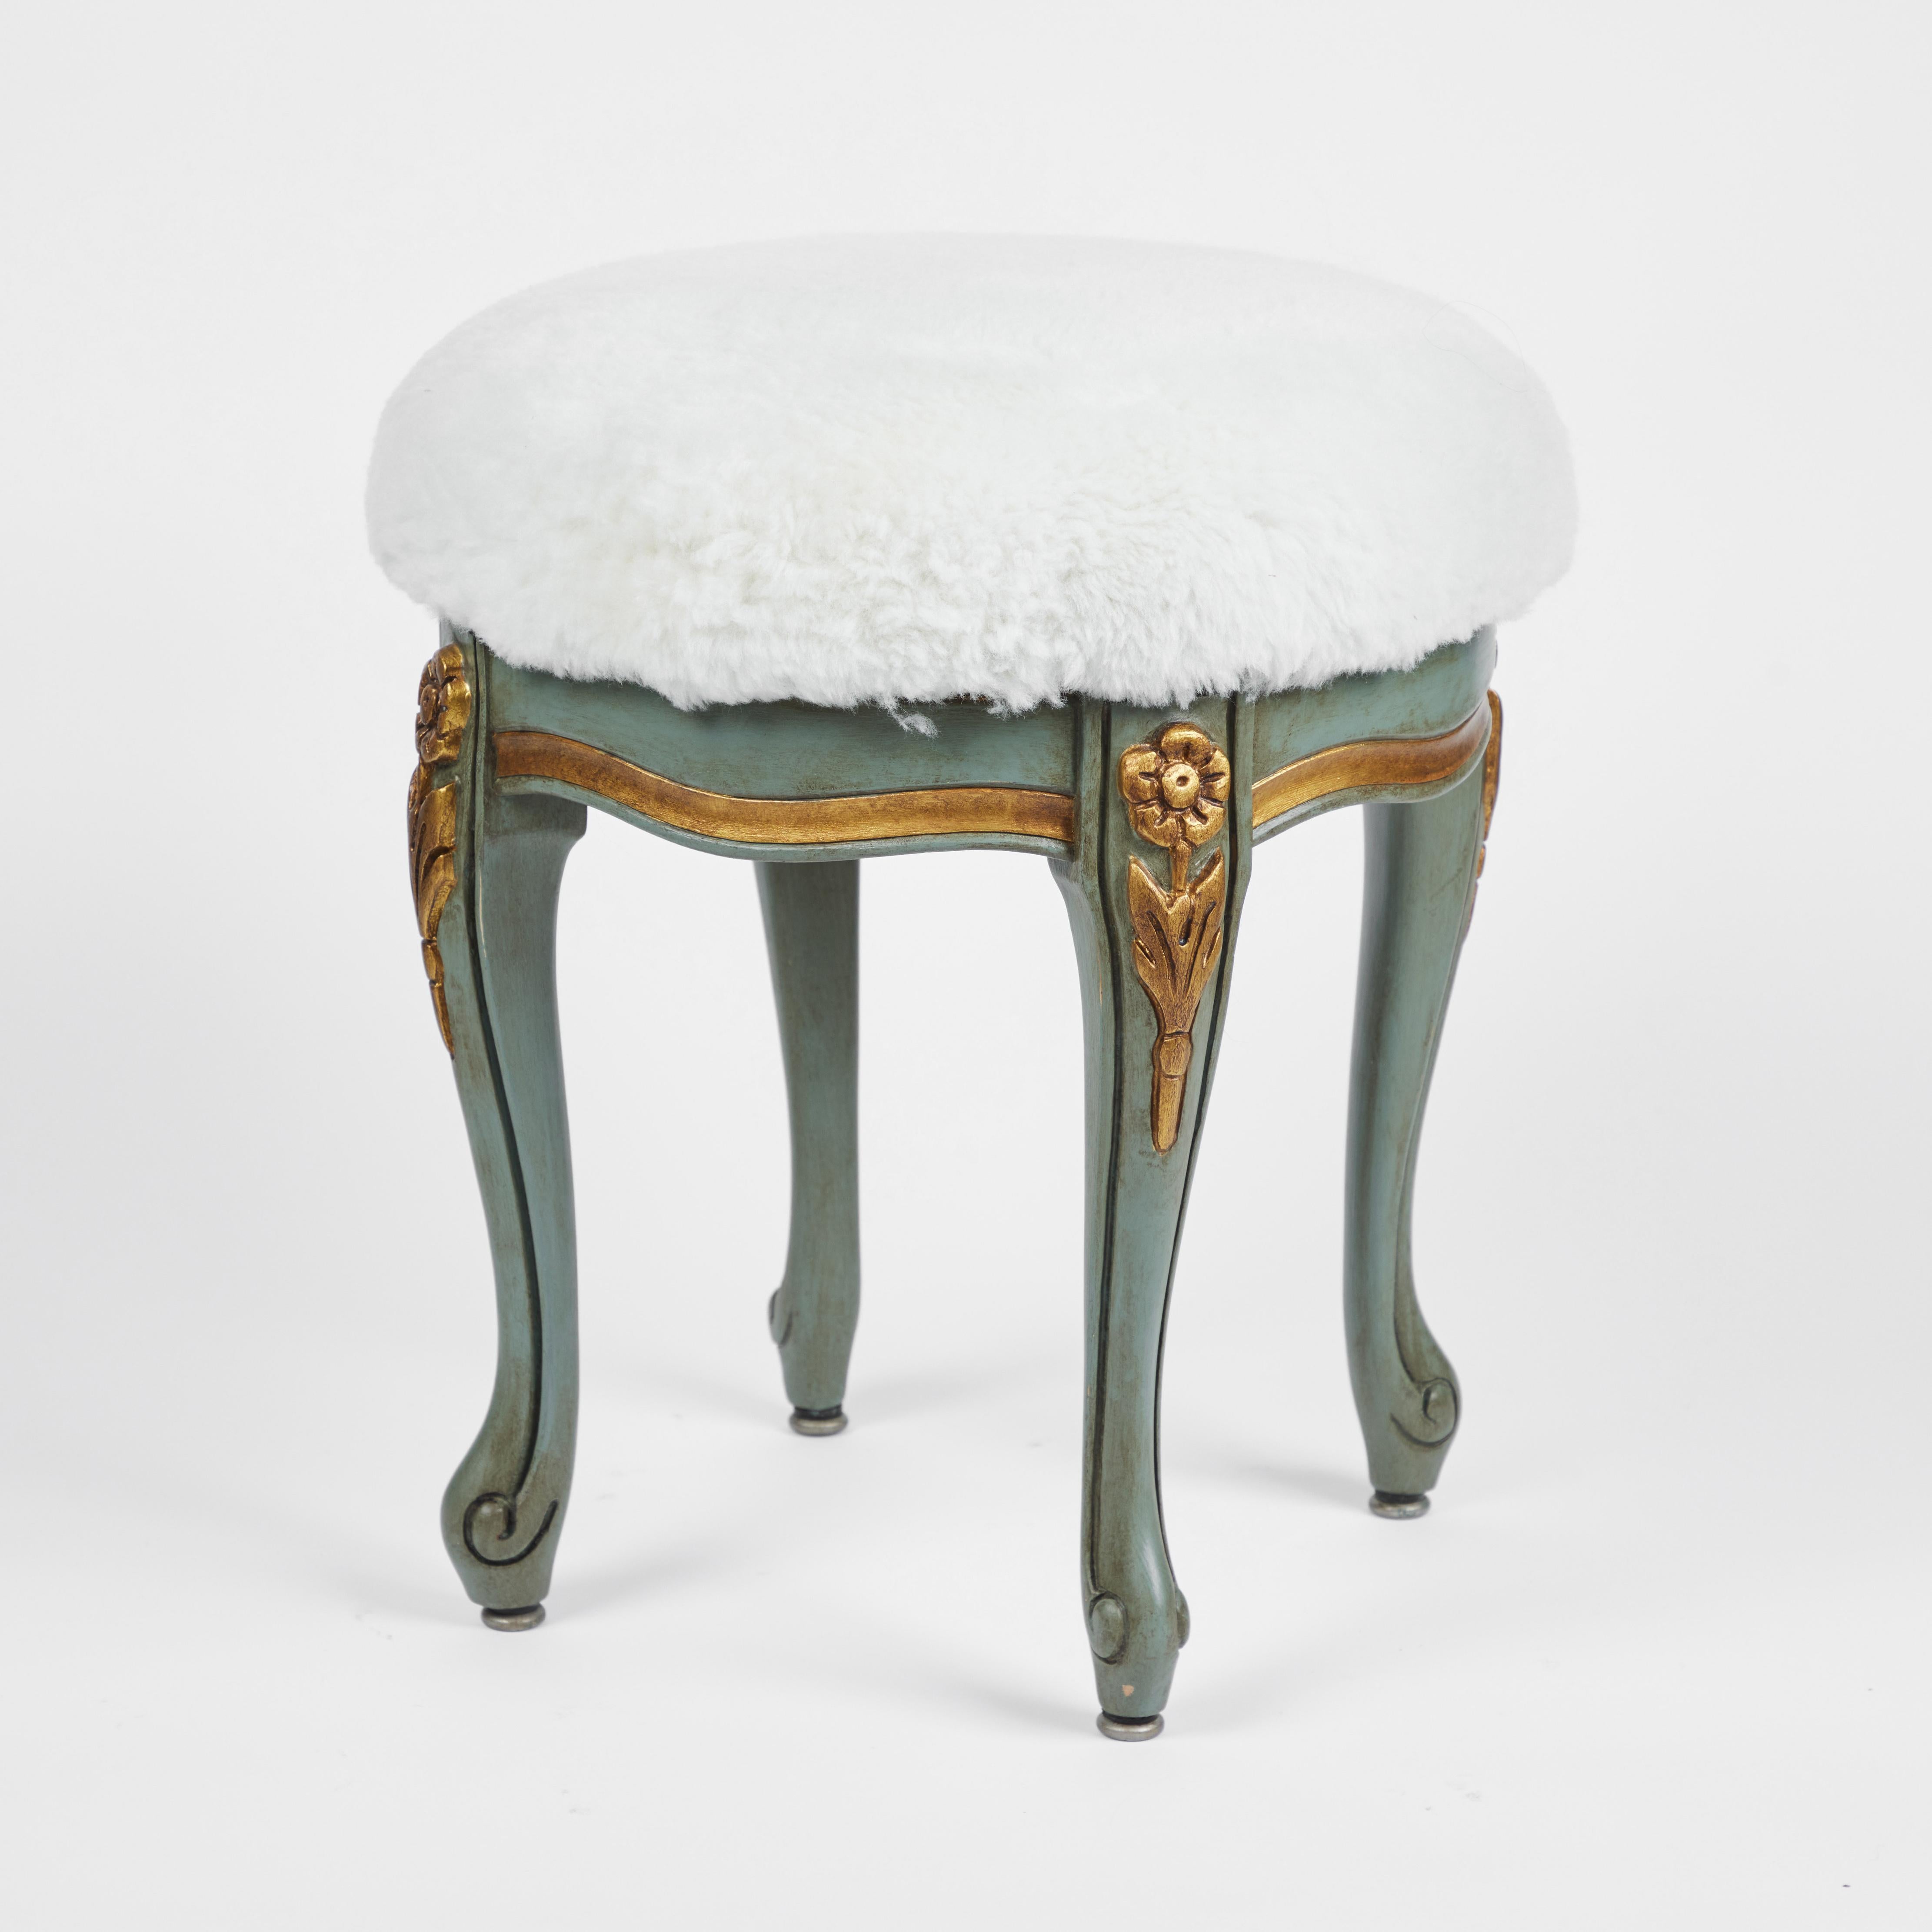 This is the perfect little vintage vanity stool.
It has been newly painted in the 'Swedish' style in aqua and gold paint with an antiqued finish, newly upholstered in fluffy white shearling and is that splendid touch of lovely with its decorative